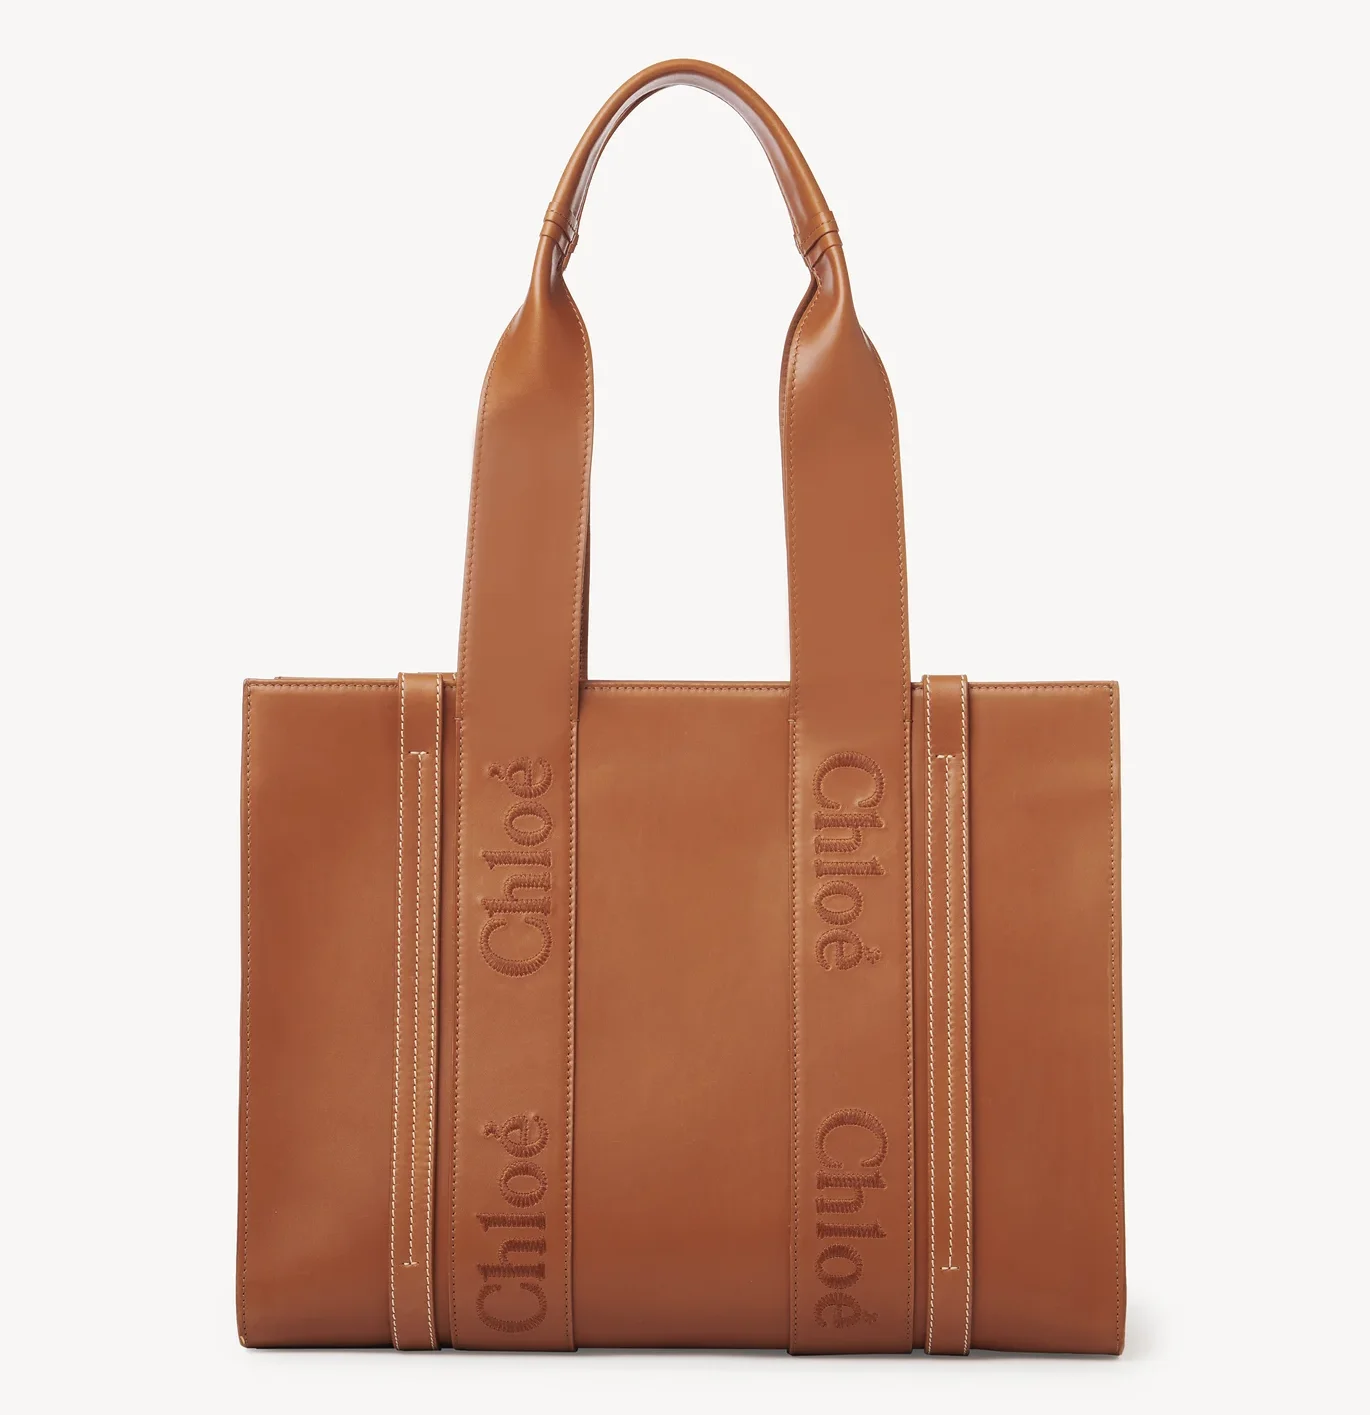 Best designer tote bags for work and life: Chloé Medium Woody Canvas Tote Bag